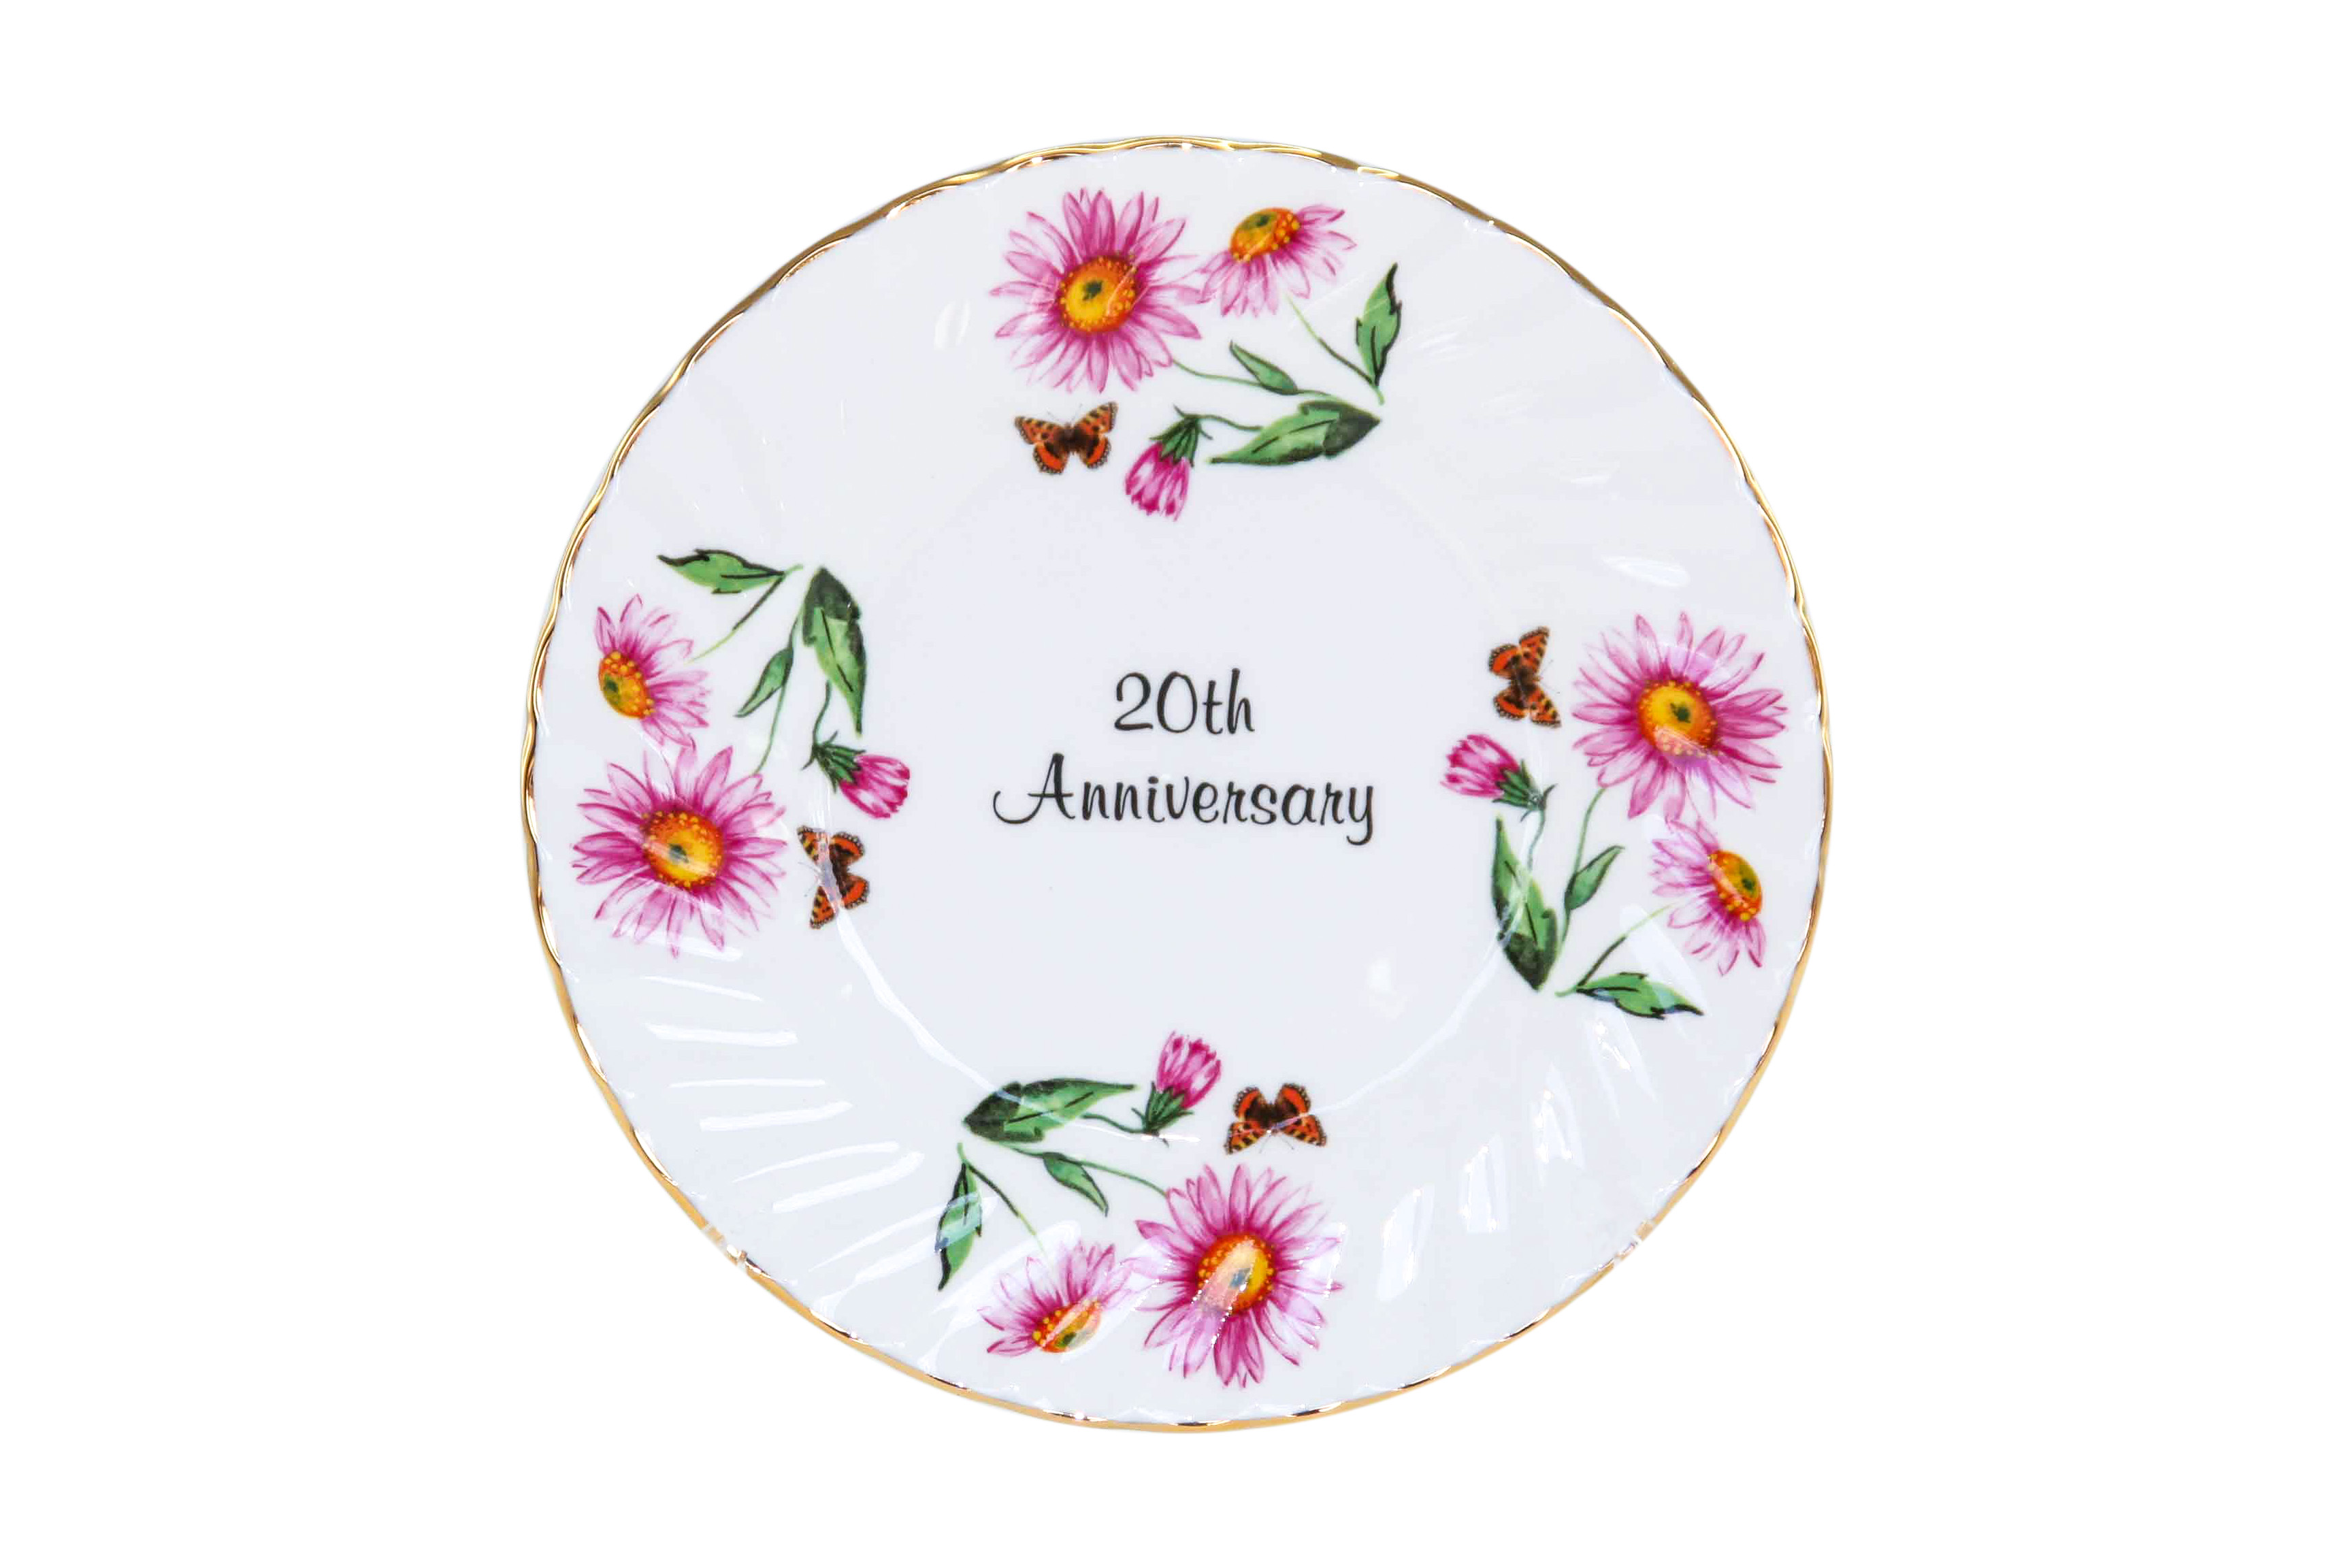 20th Anniversary Plate (6 inch) with stand